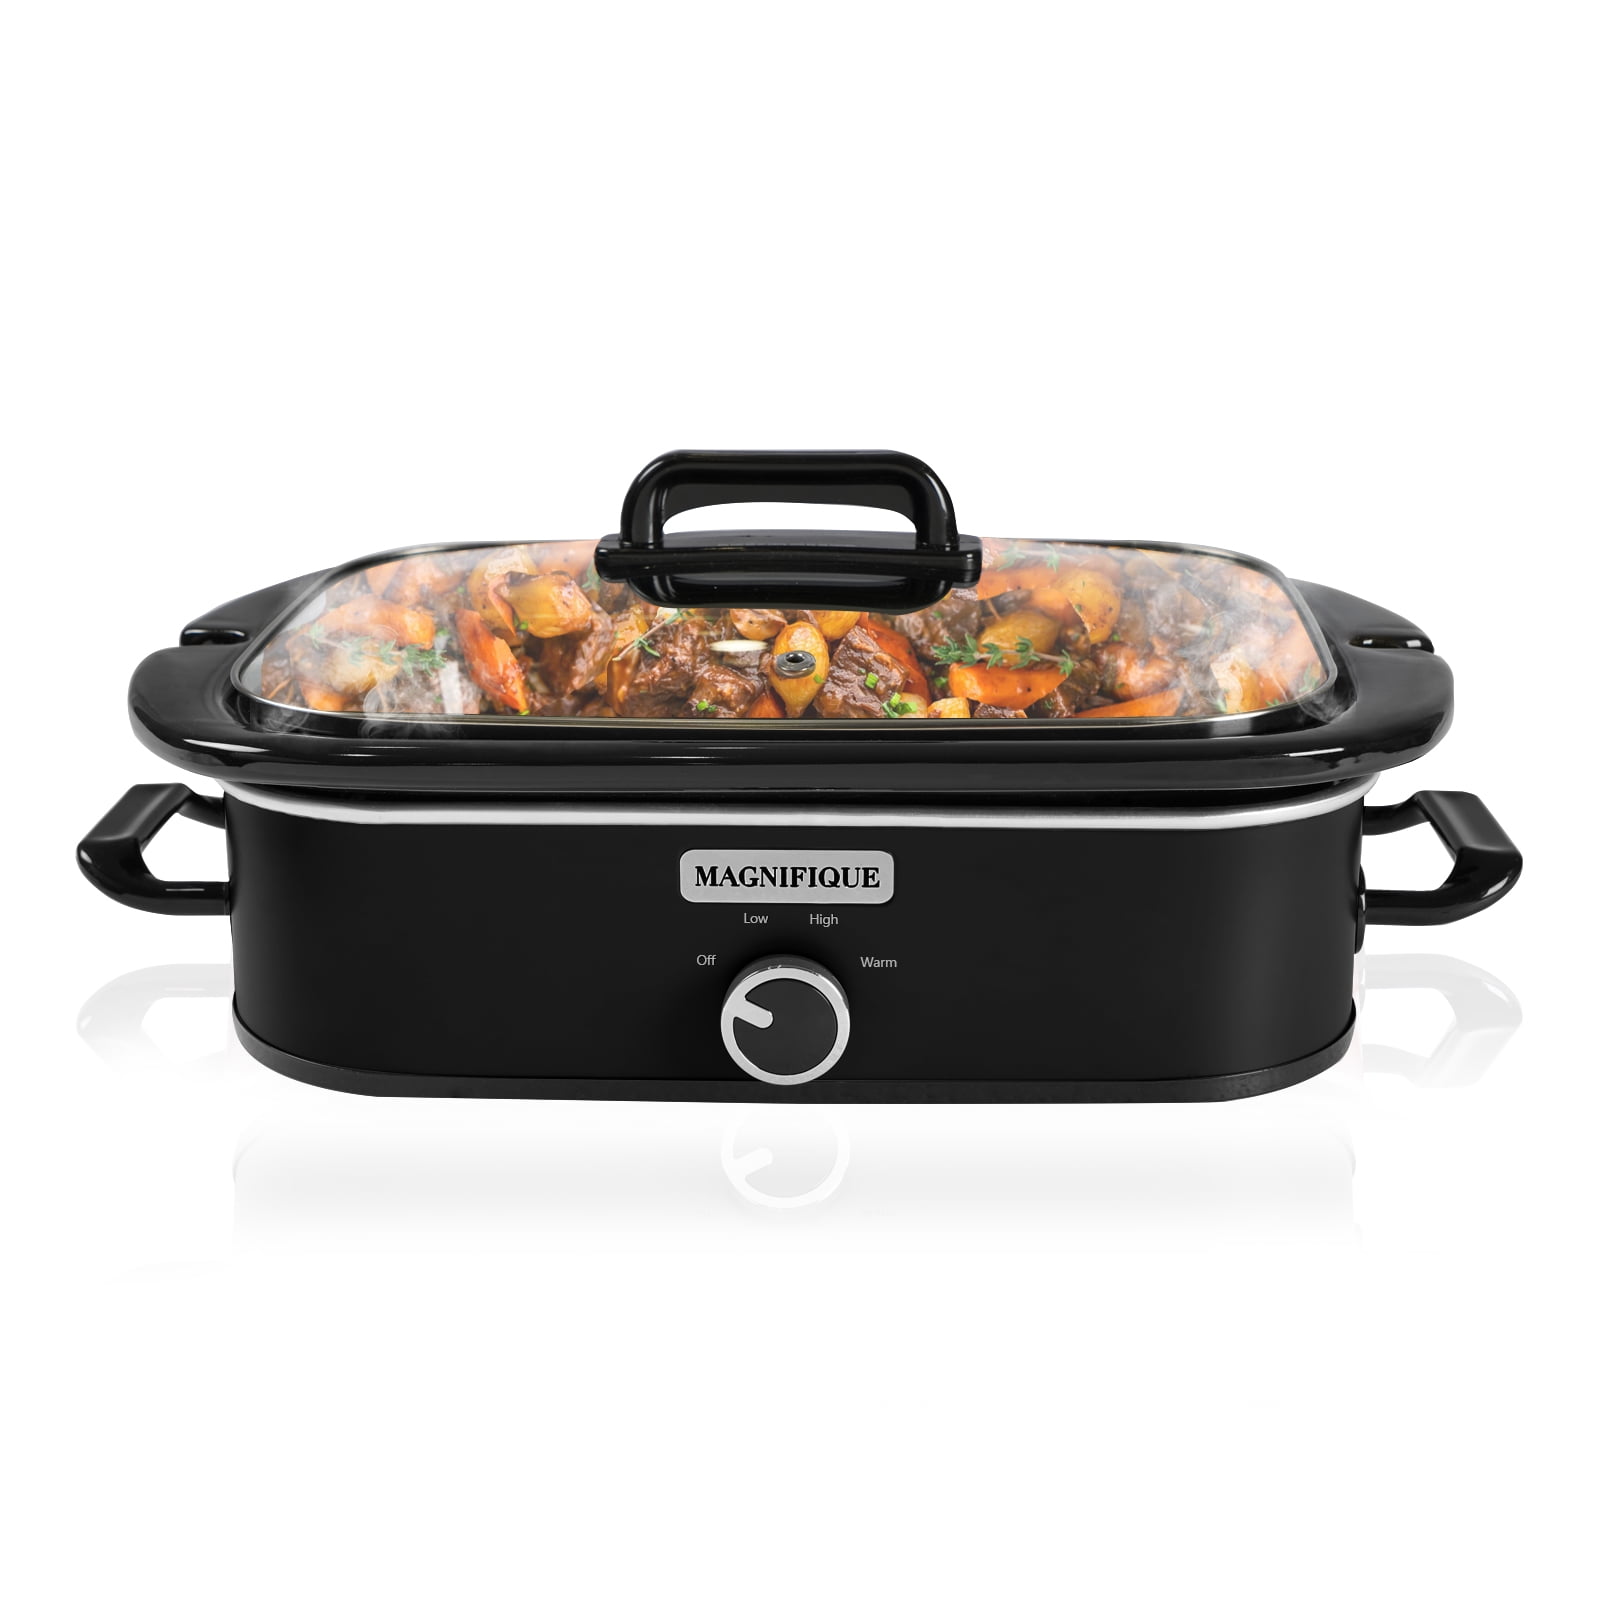  [NEW] MAGNIFIQUE 4-Quart Slow Cooker with Casserole Digital  Warm Setting - Perfect Kitchen Small Appliance for Family Dinners,  Dishwasher Safe Crock, Blue: Home & Kitchen